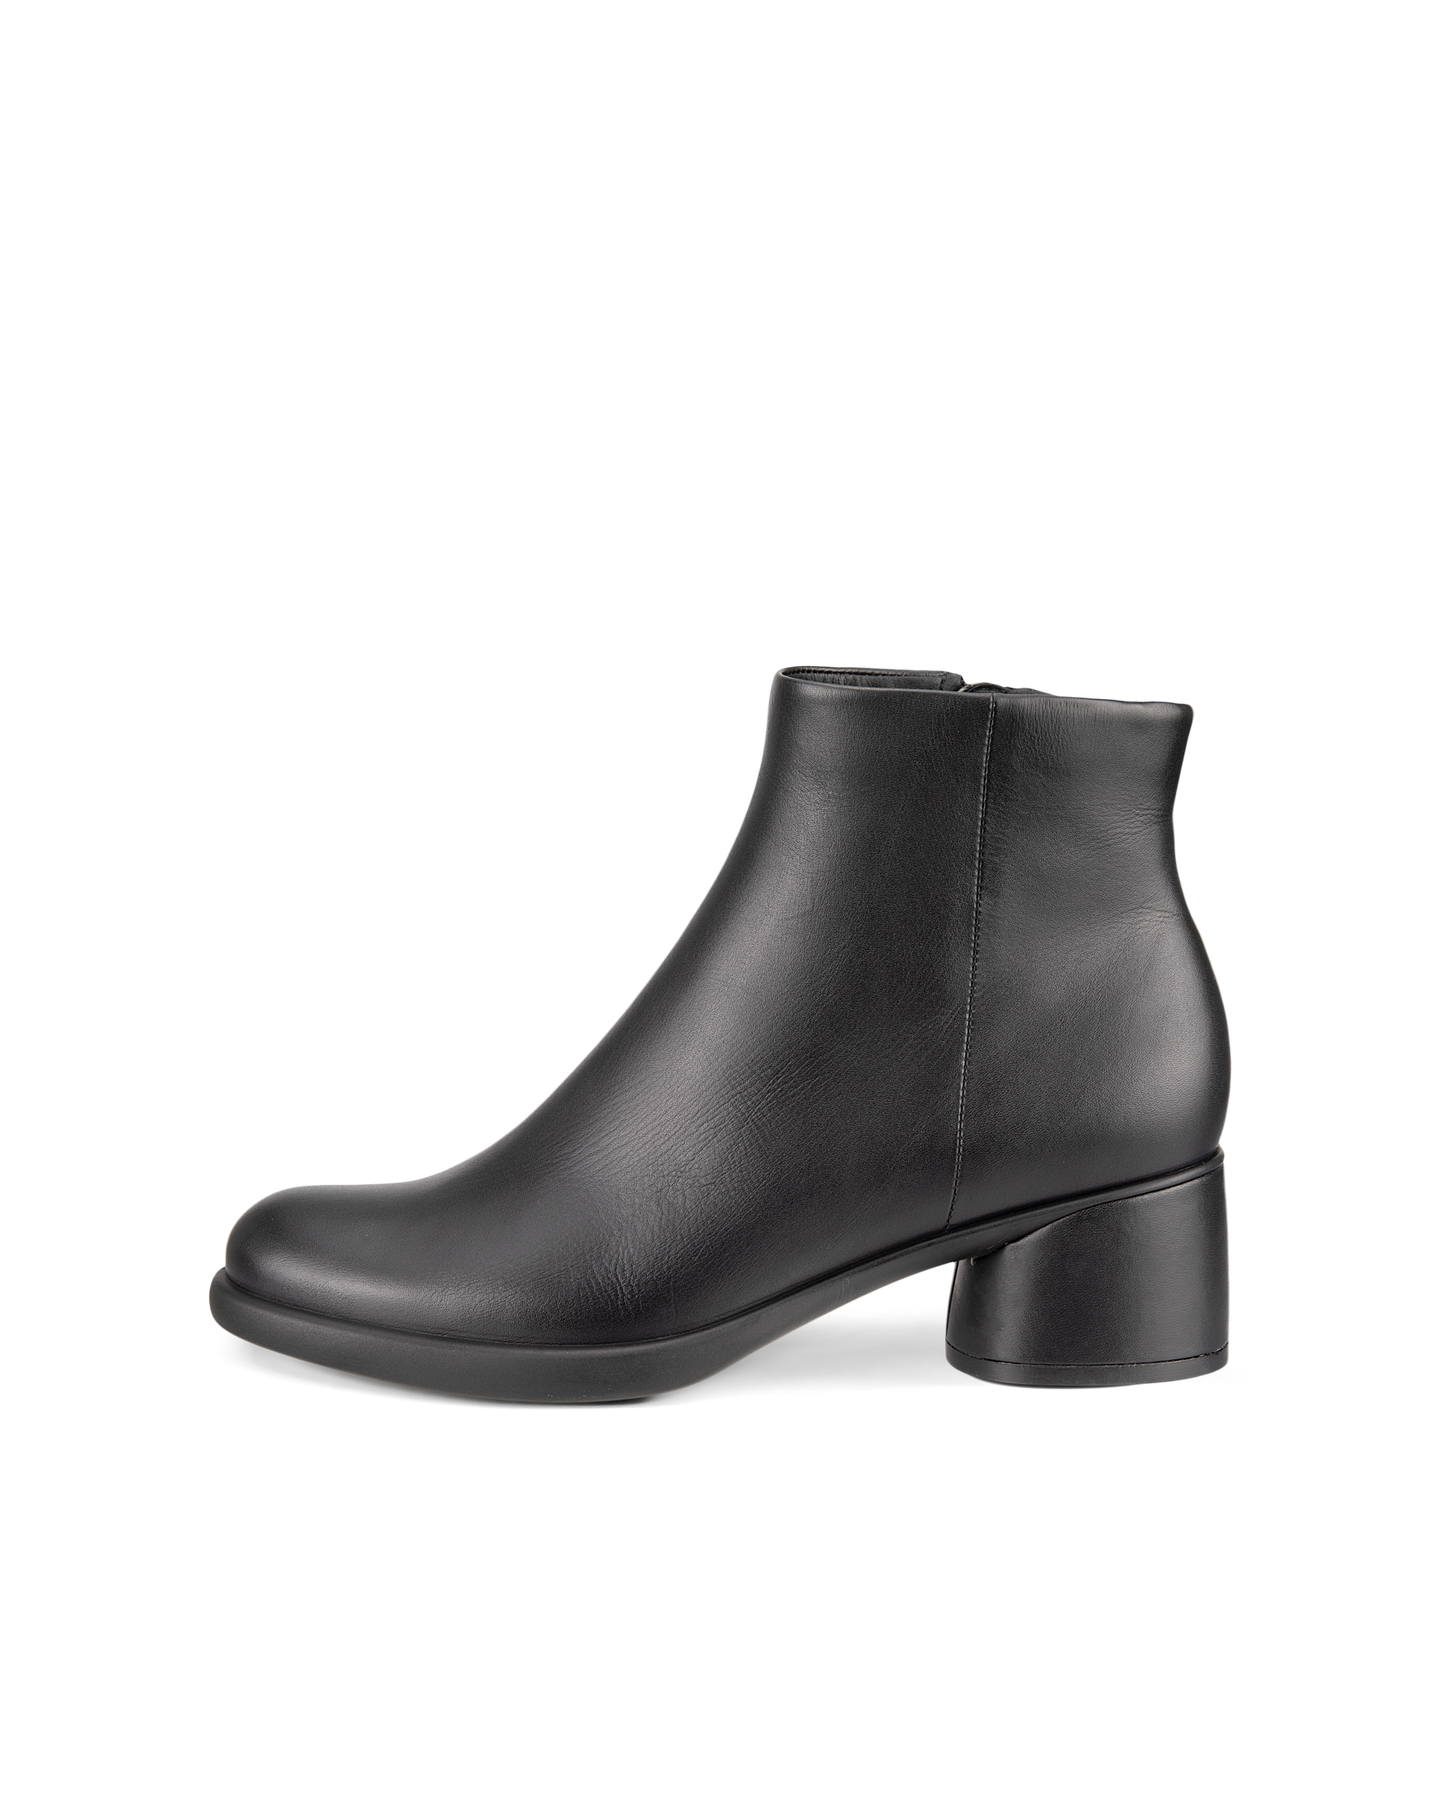 UPC 194891337465 product image for ECCO Women's Sculpted Lx 35 Ankle Boot Size 8 Leather Black | upcitemdb.com